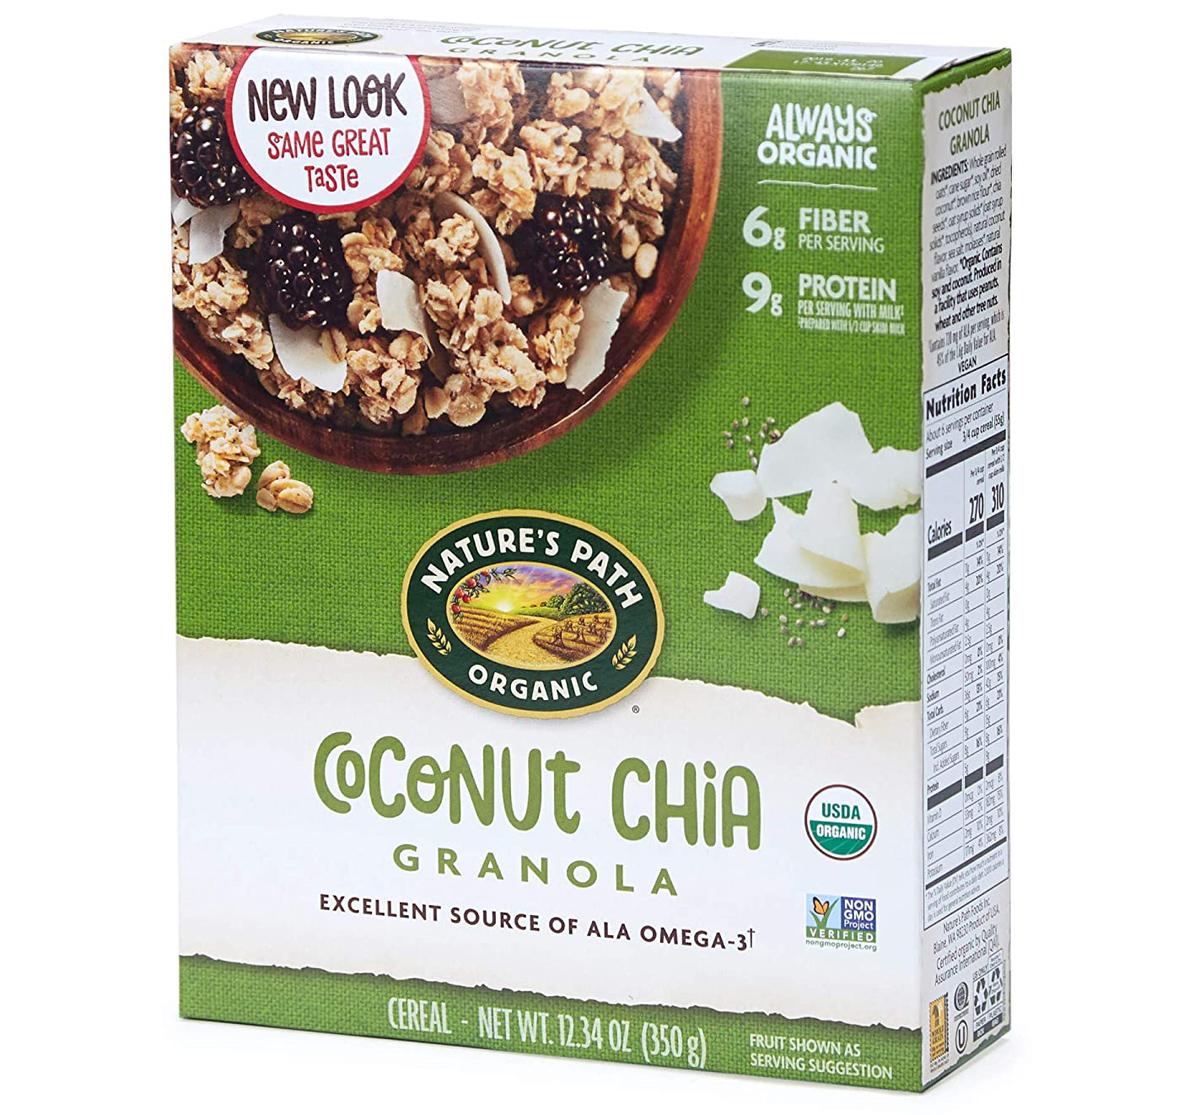 Natures Path Organic Granola for $2.24 Shipped